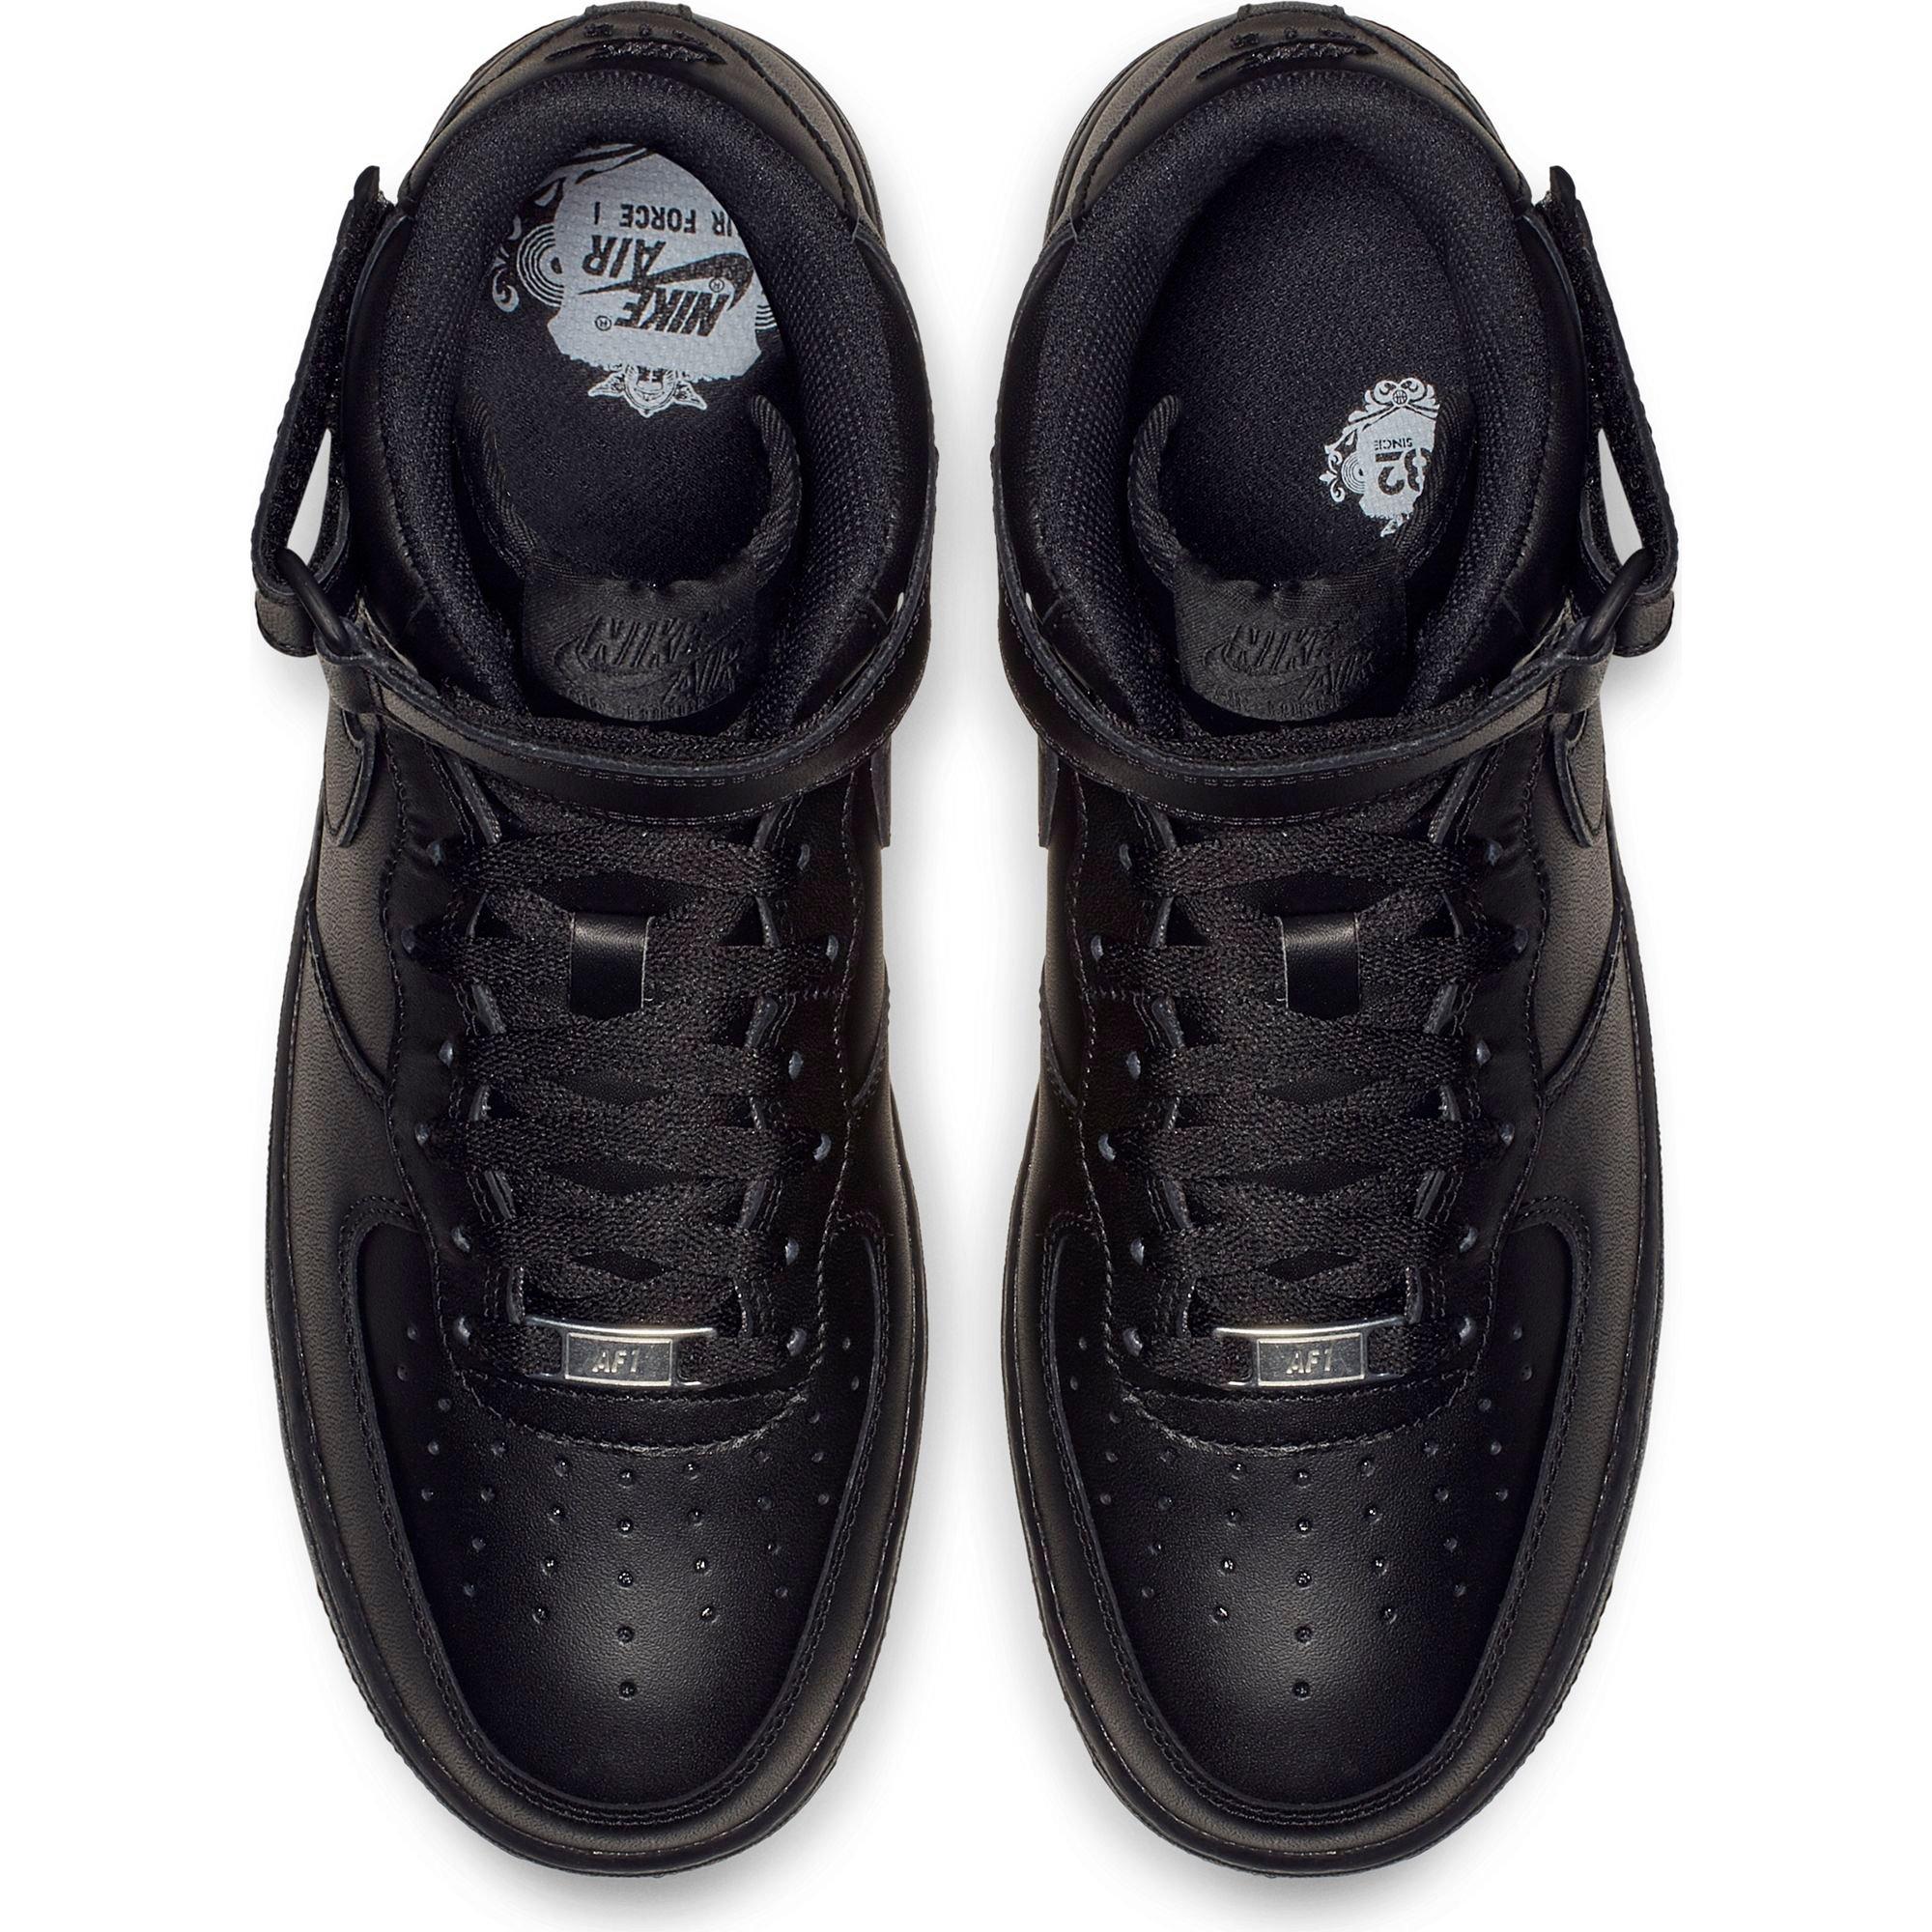 High Quality NIKE Air Force Black Sneakers Available Instore in